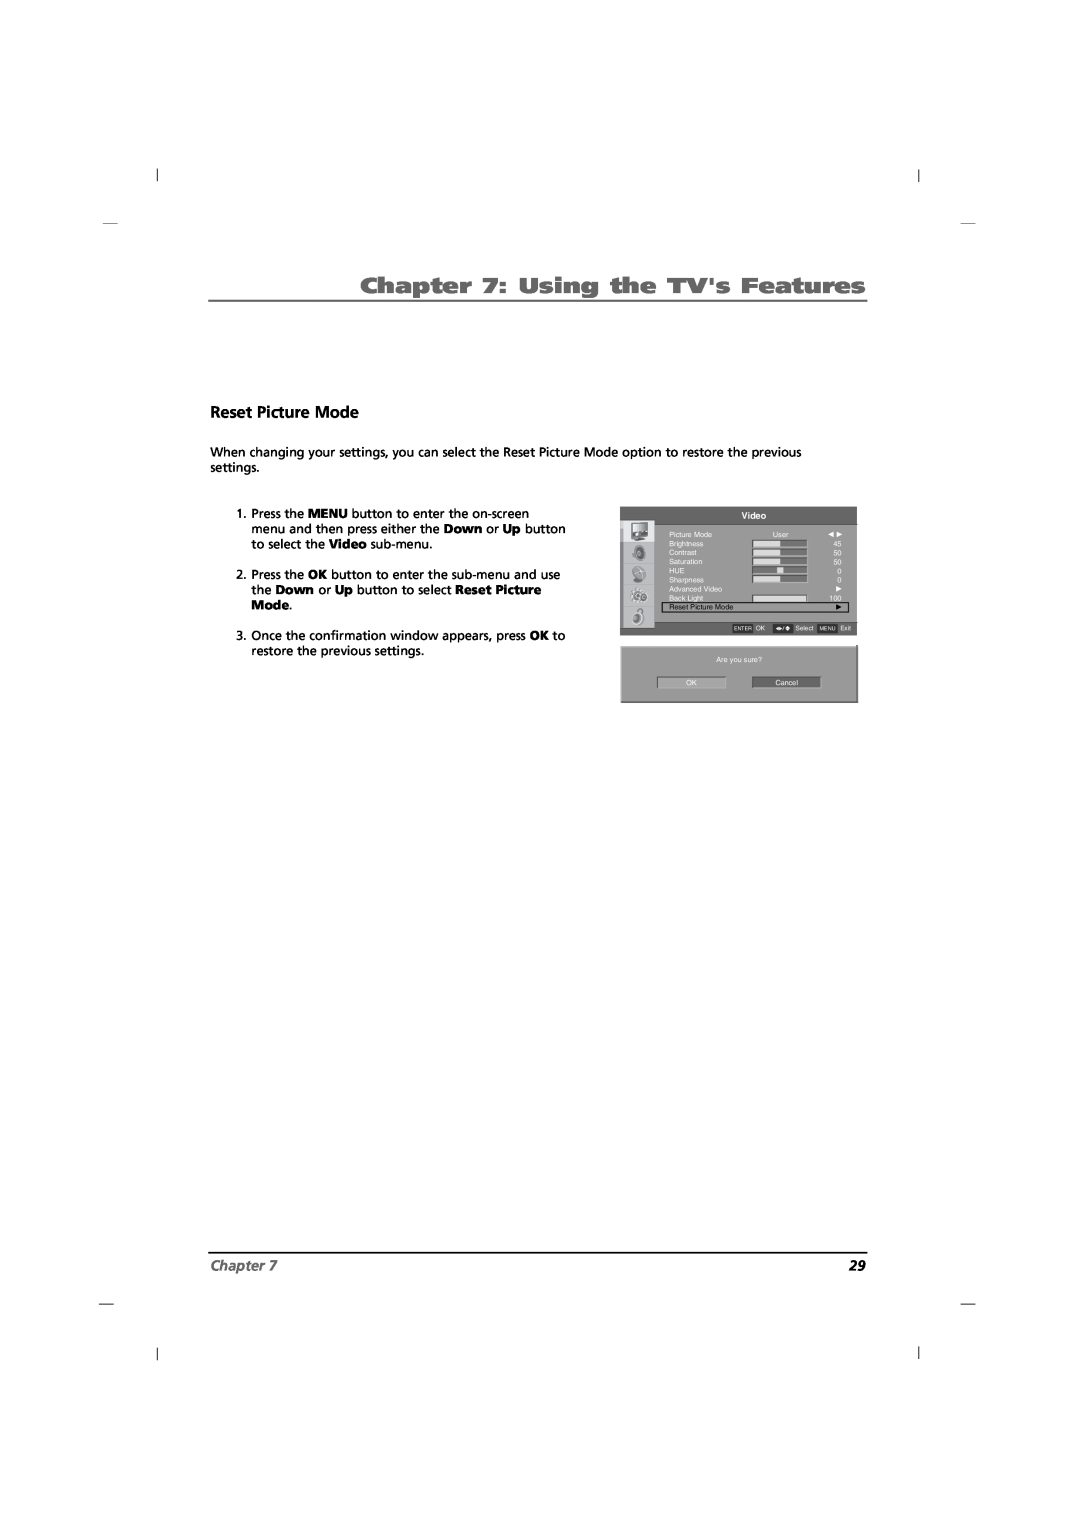 RCA J12H770 manual Reset Picture Mode, Using the TVs Features, Chapter 